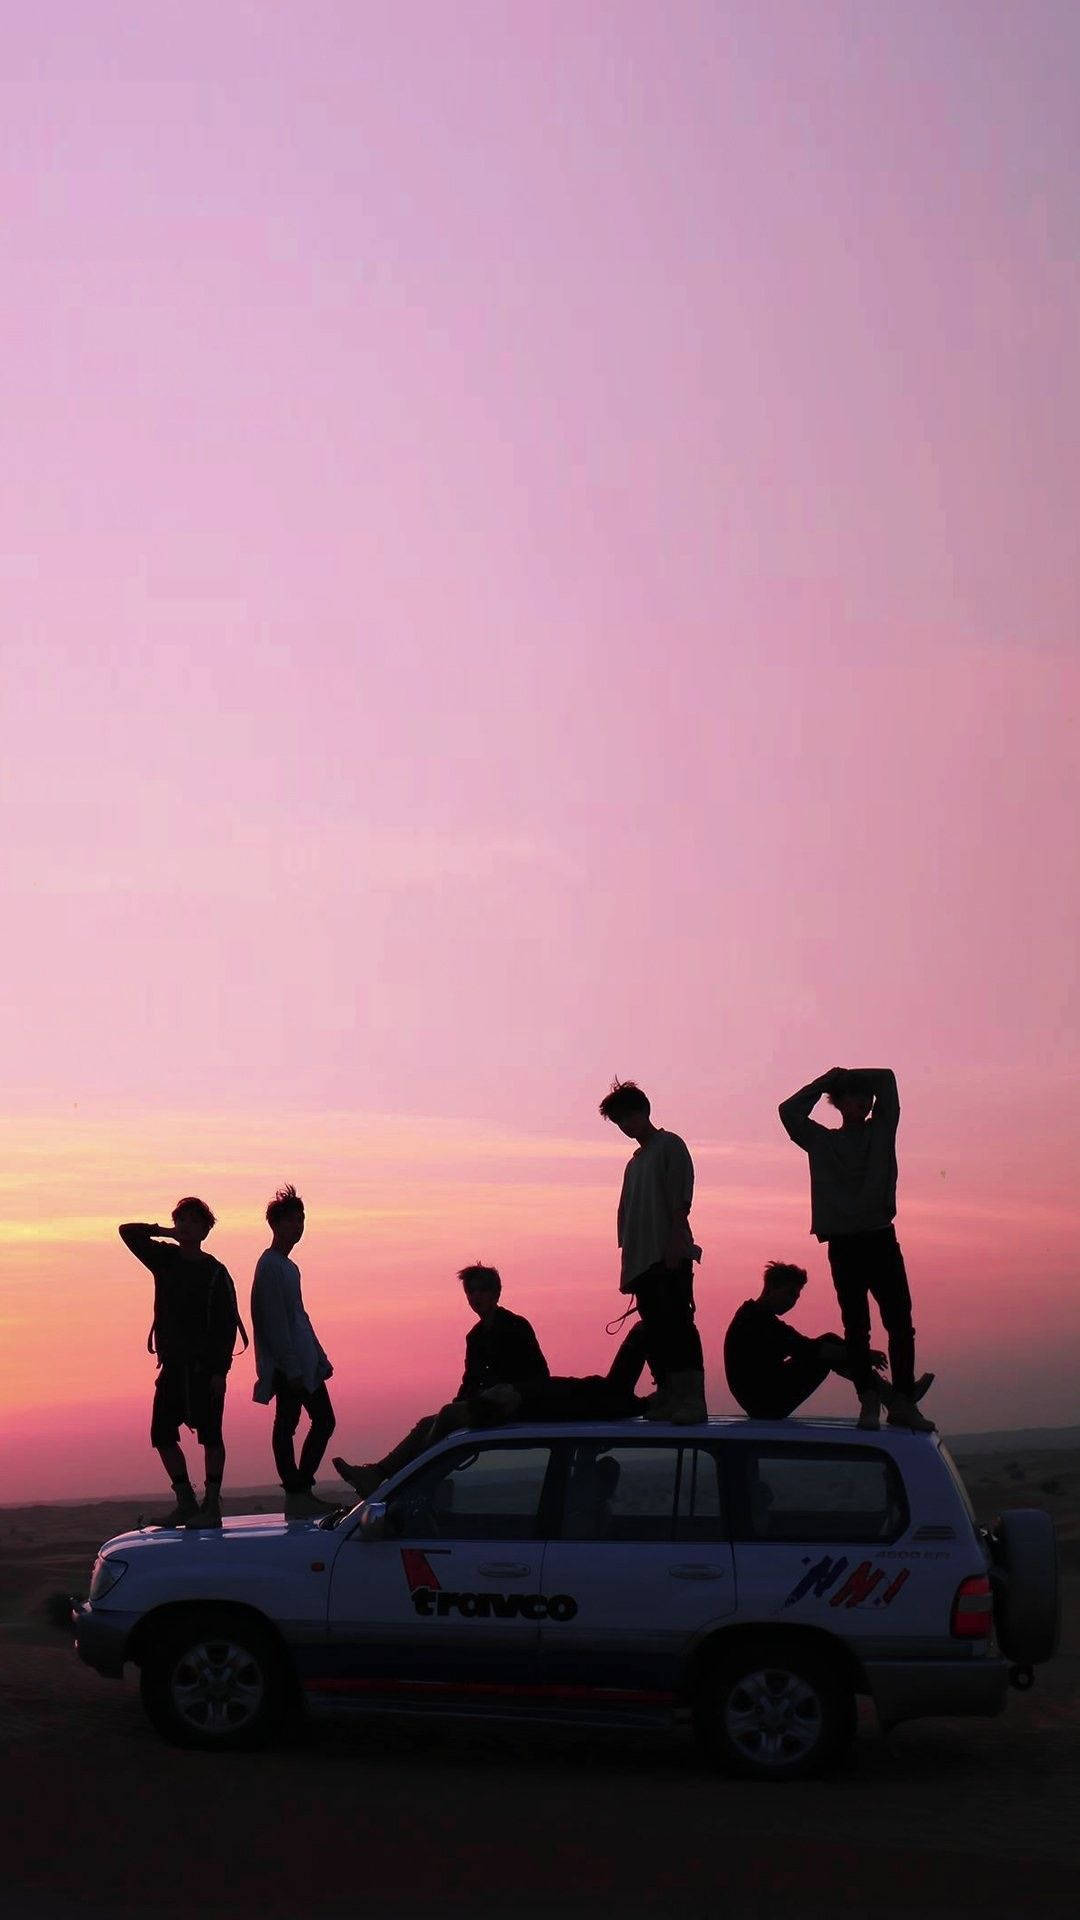 Aesthetic Bts Silhouette On Pink Skies Background